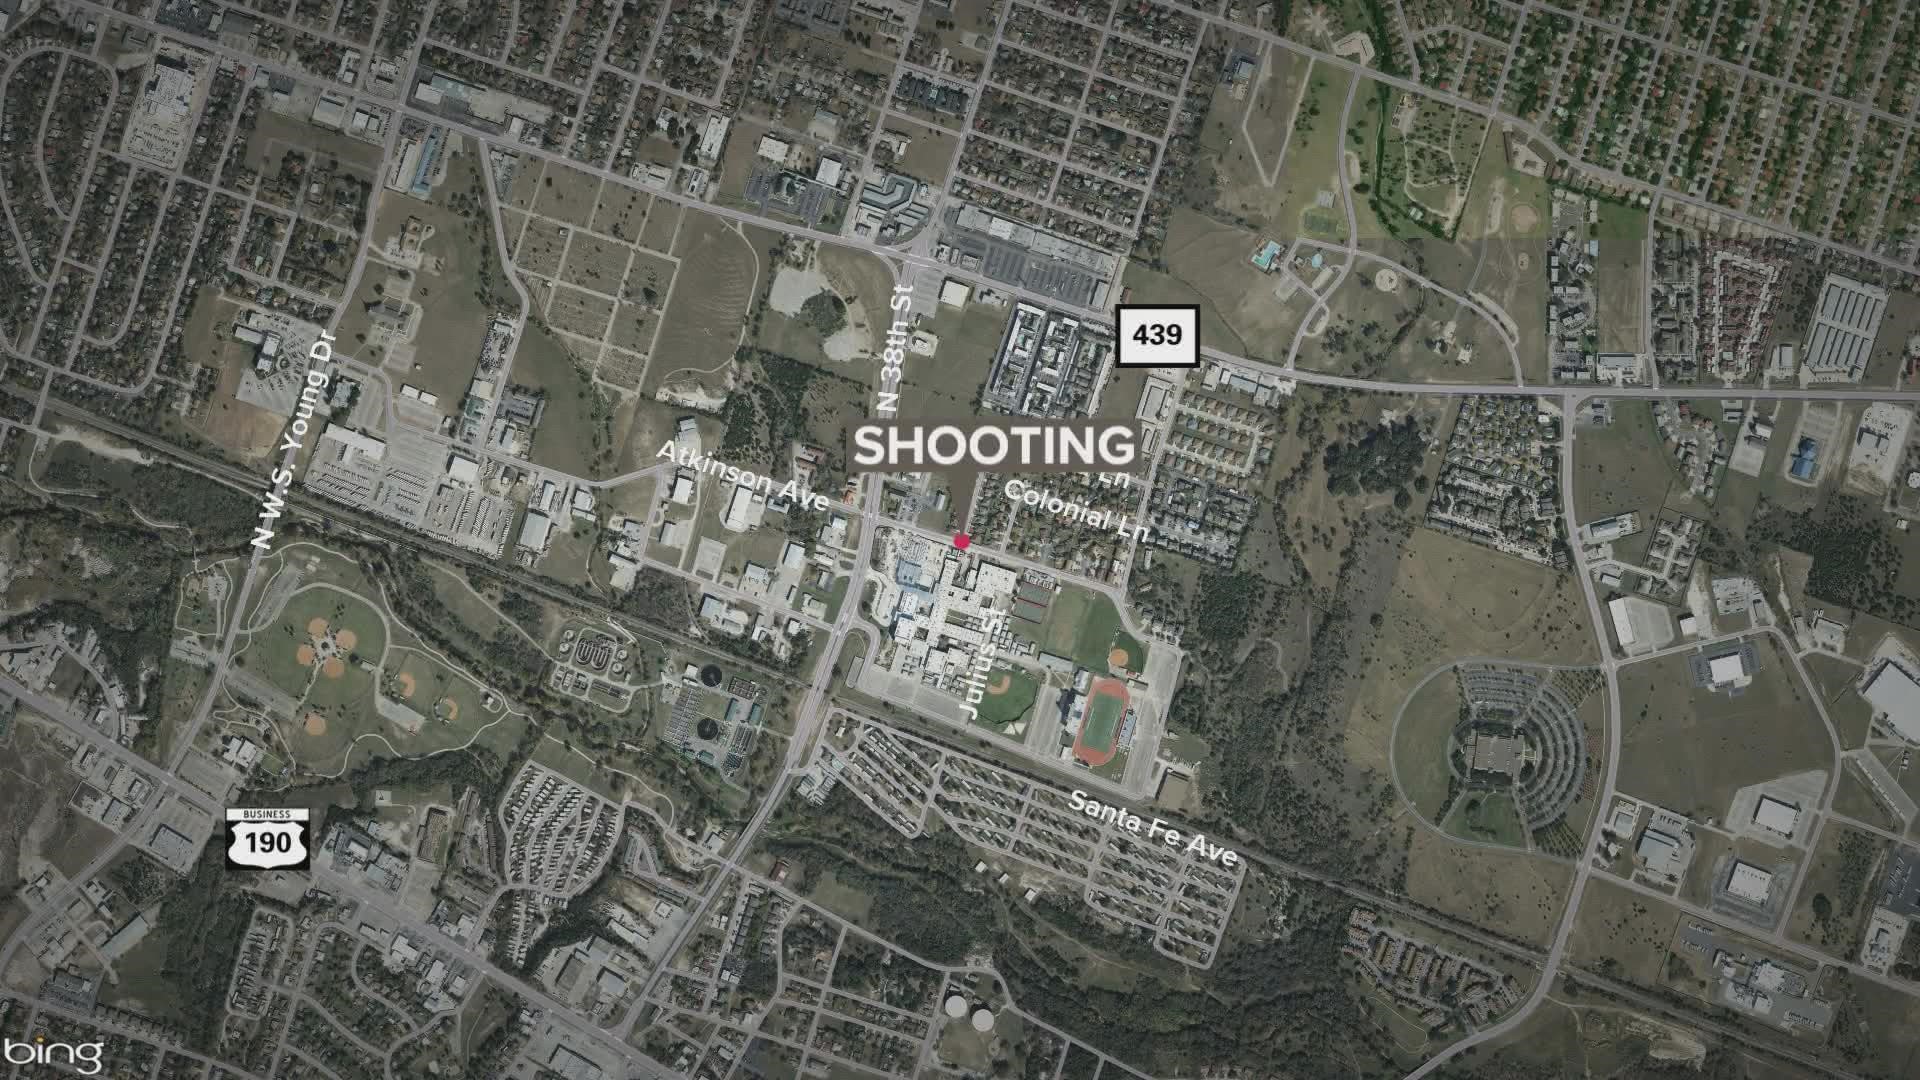 An 18-year-old shot in Killeen did not survive his injuries.